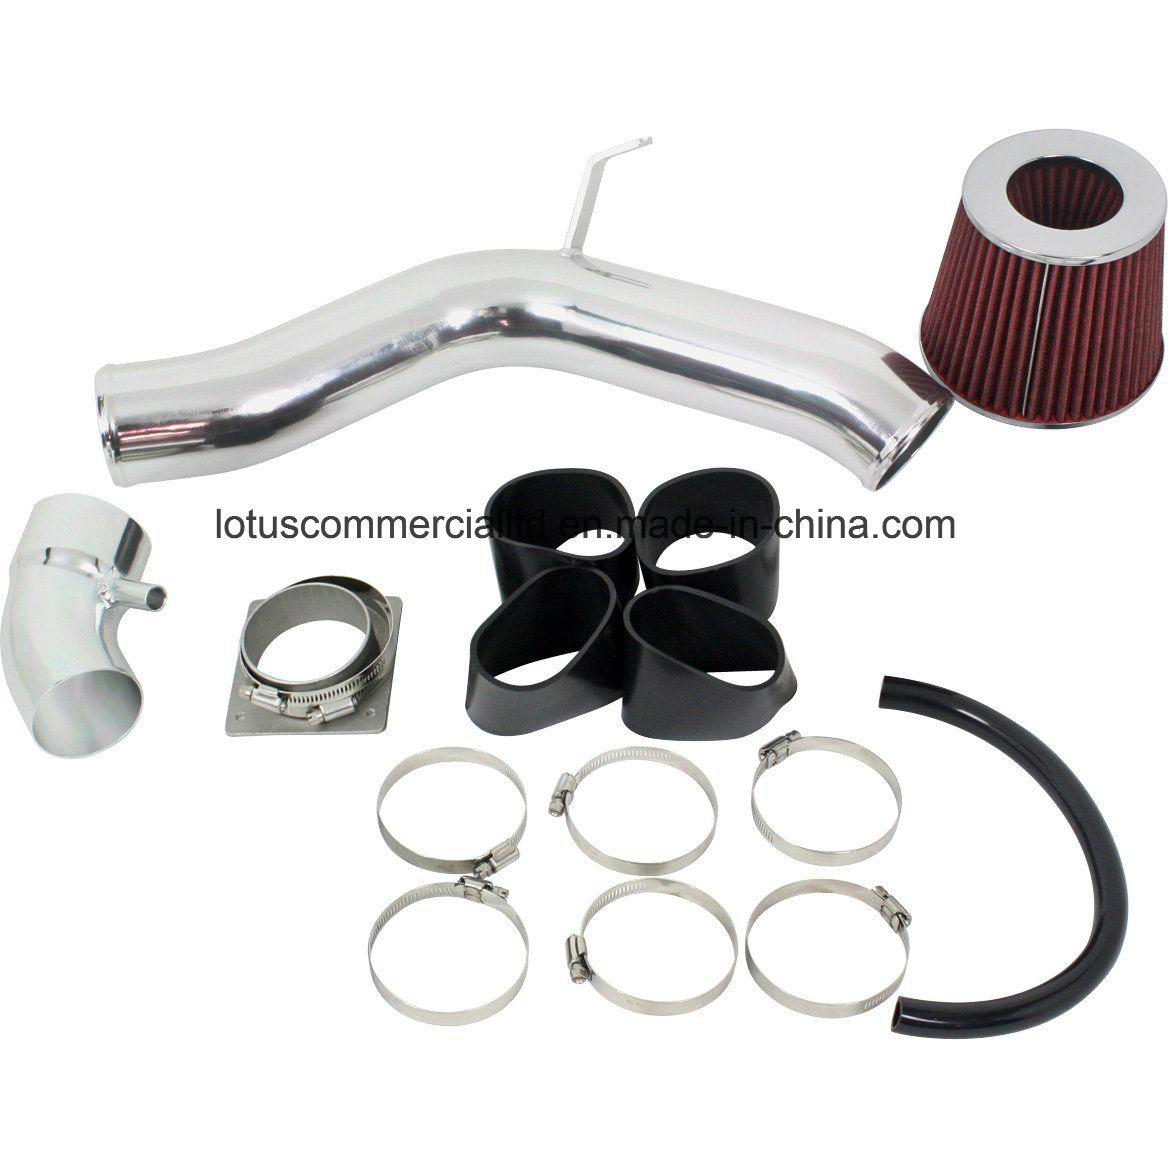 Spare Cold Air Intake Cai for Nissan Altima